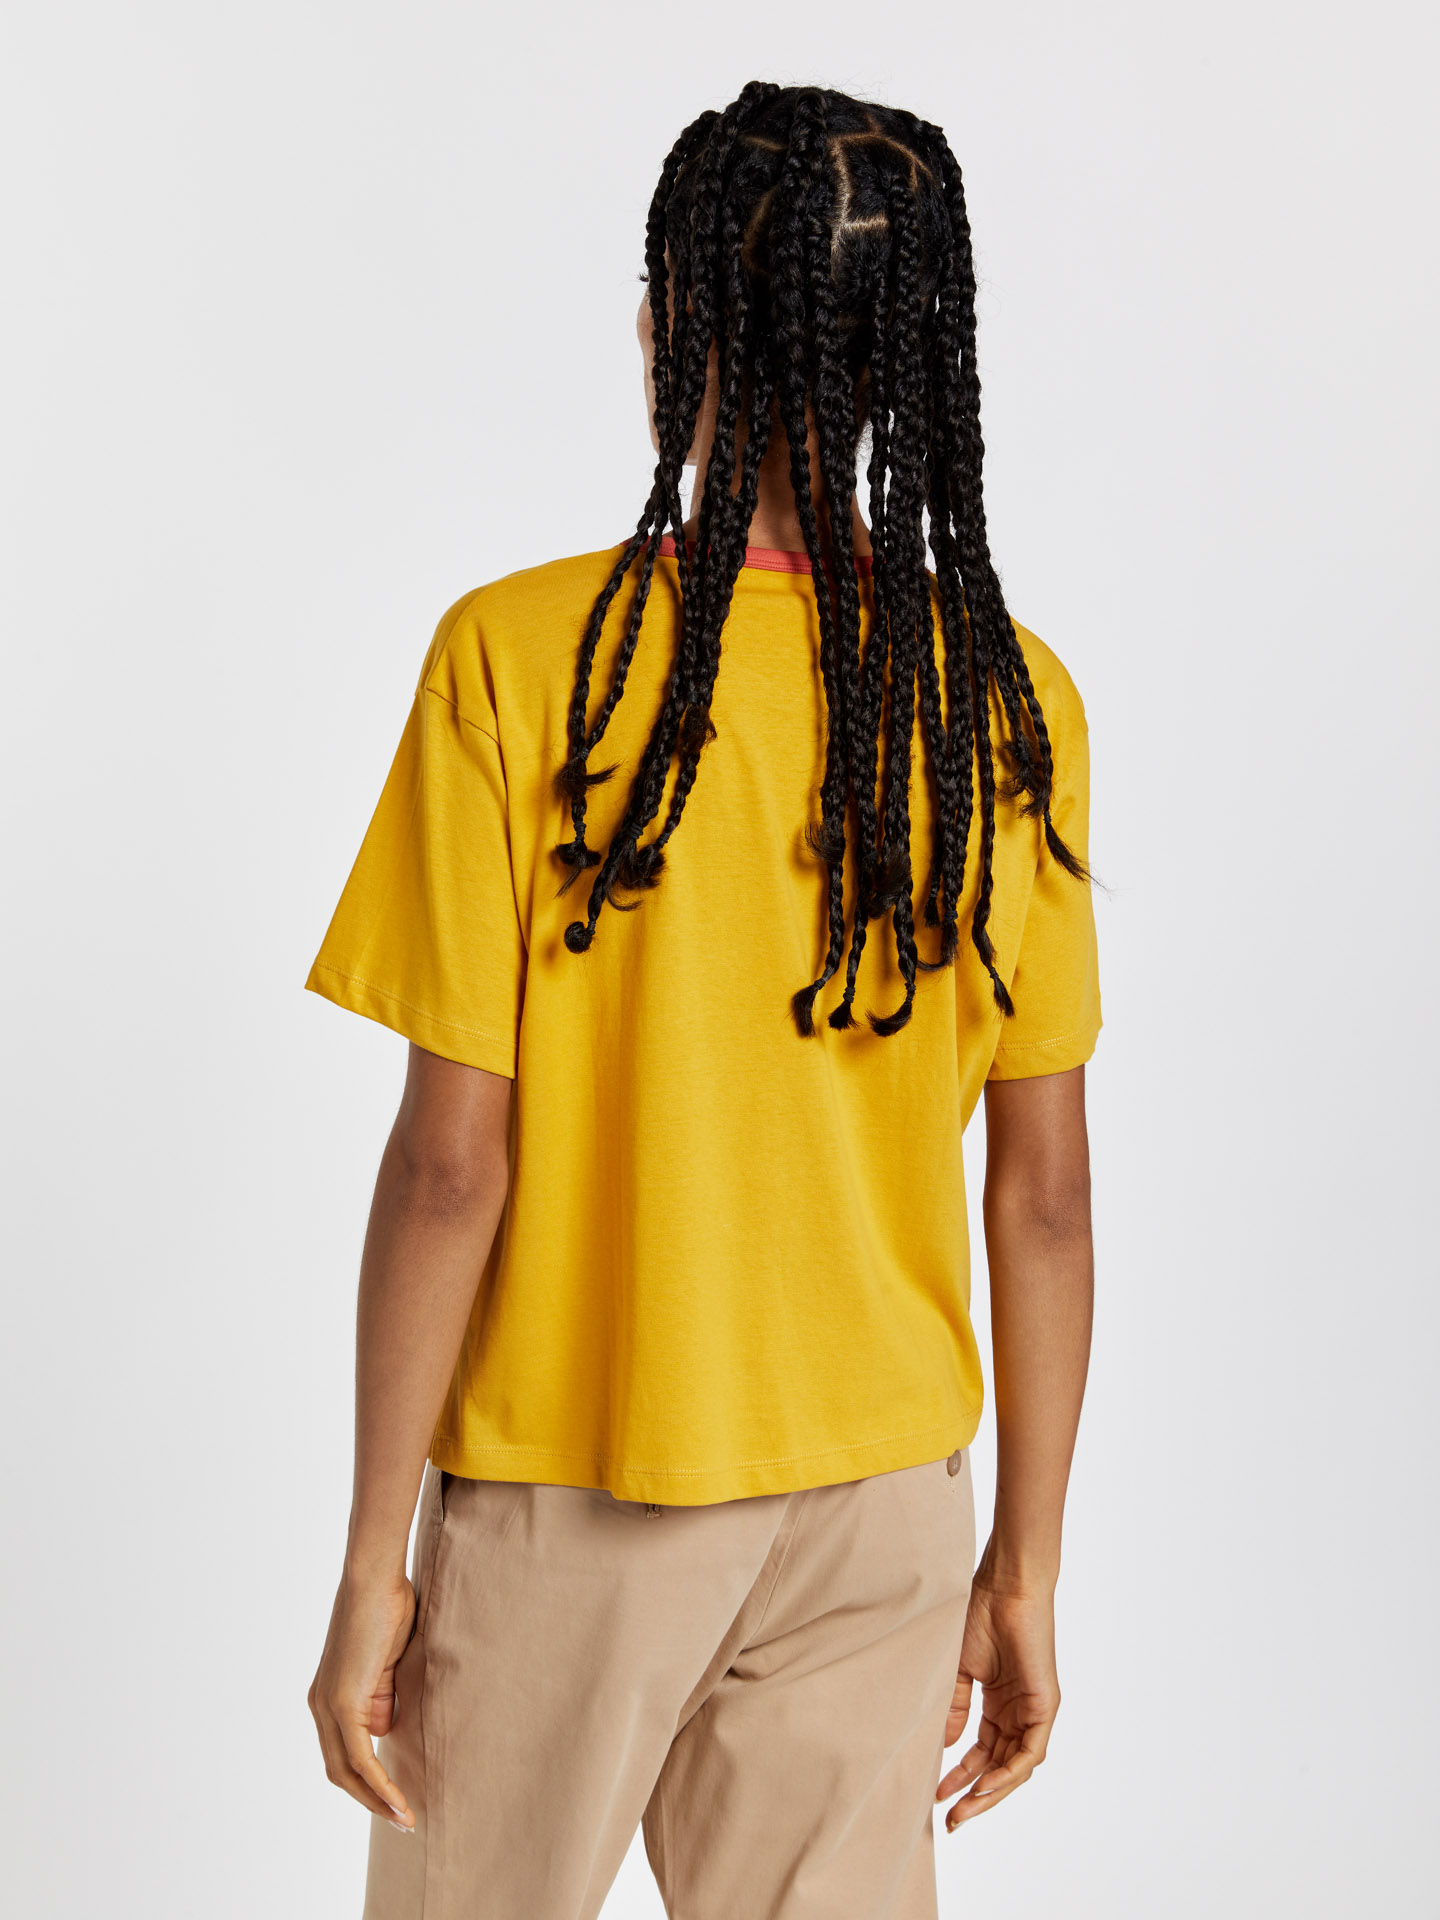 T-Shirt Amarelo Casual Mulher